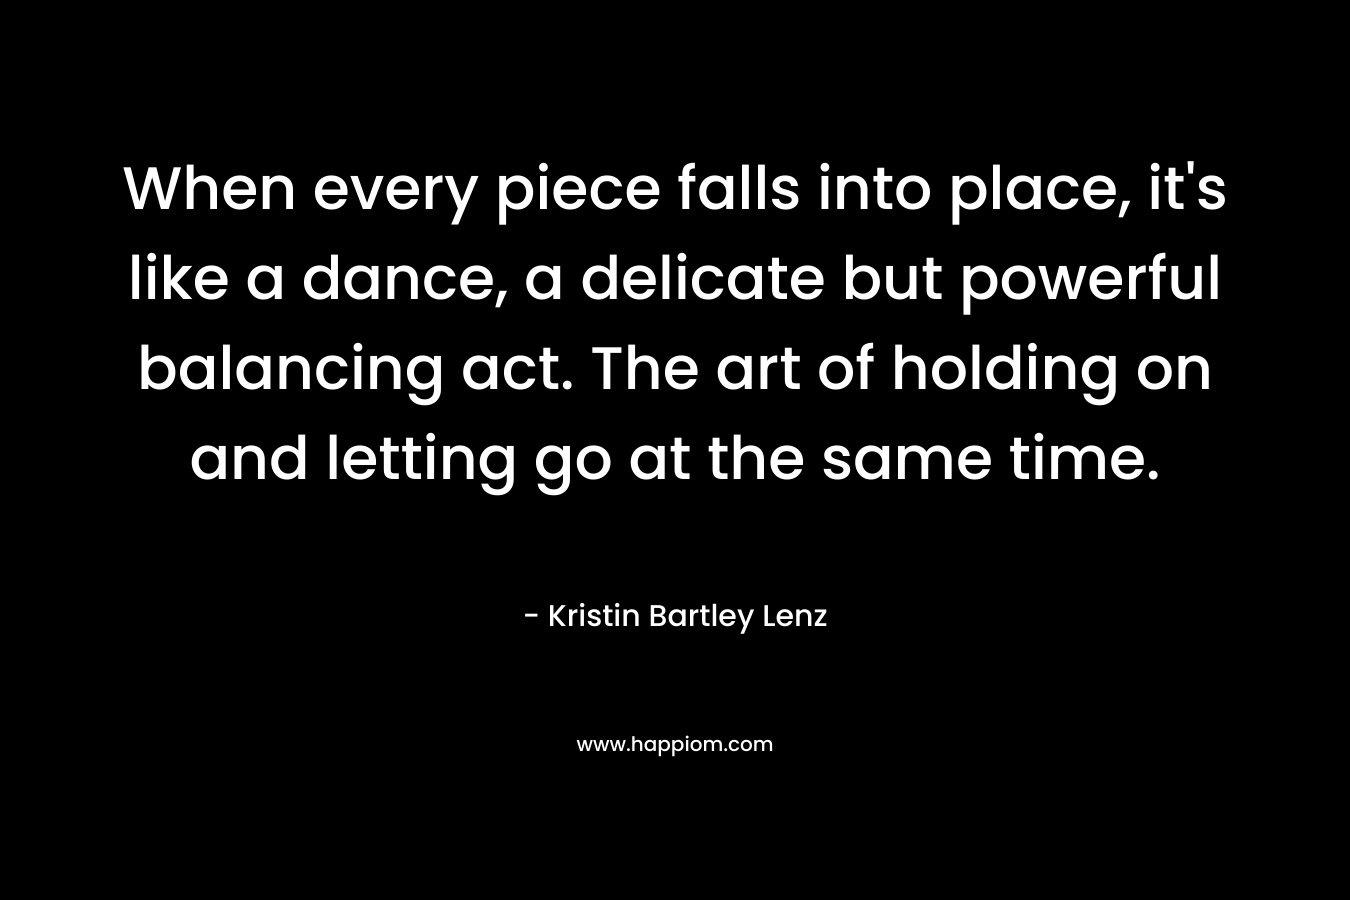 When every piece falls into place, it’s like a dance, a delicate but powerful balancing act. The art of holding on and letting go at the same time. – Kristin Bartley Lenz